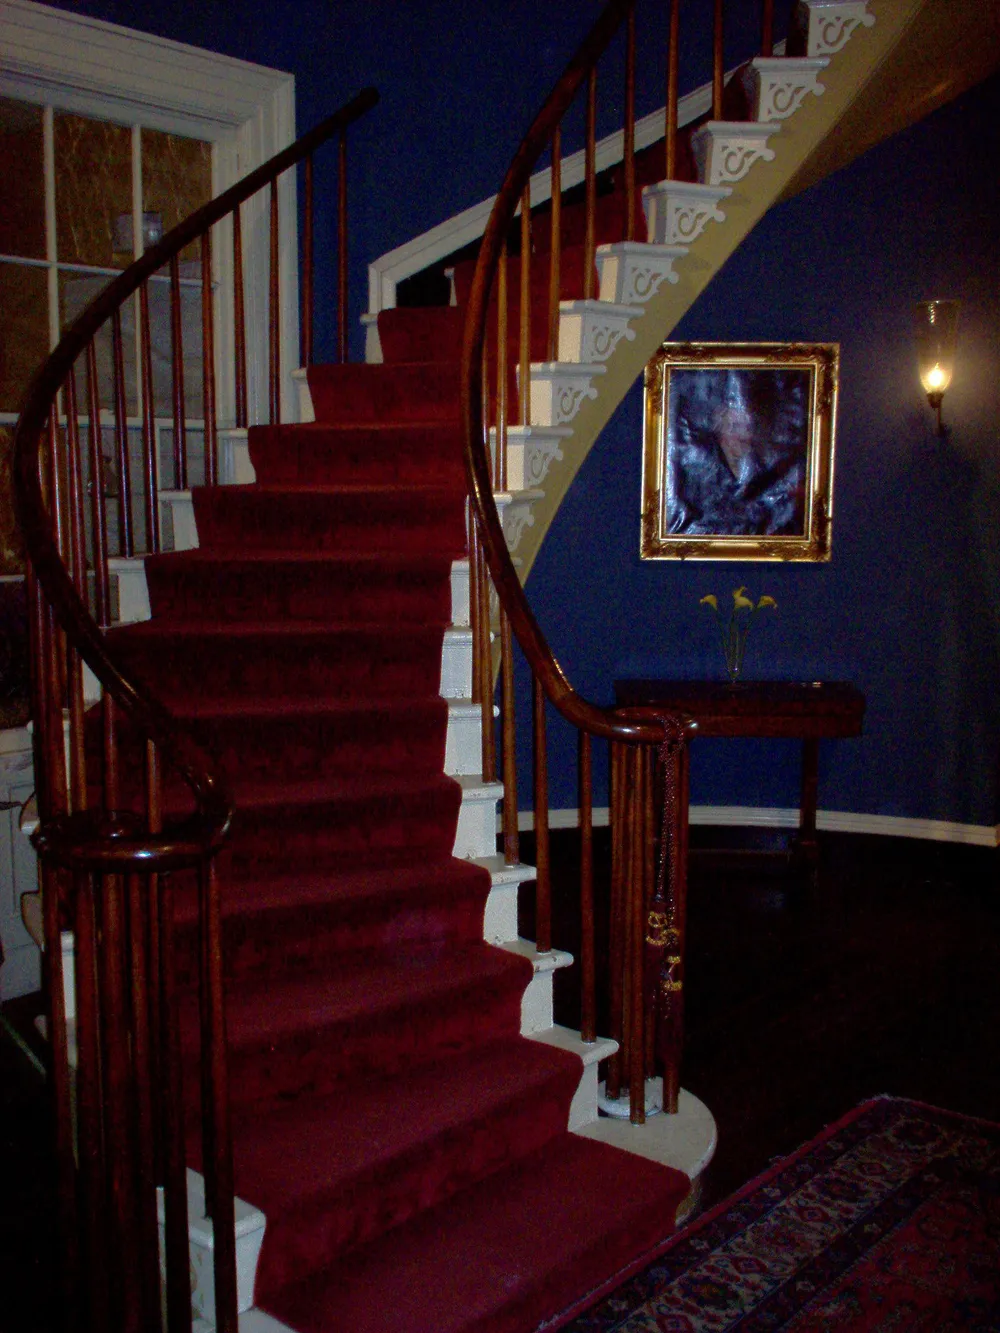 The image shows an elegant staircase with red carpeting ornate white balusters and dark wood handrails complemented by blue walls and a framed picture on the wall